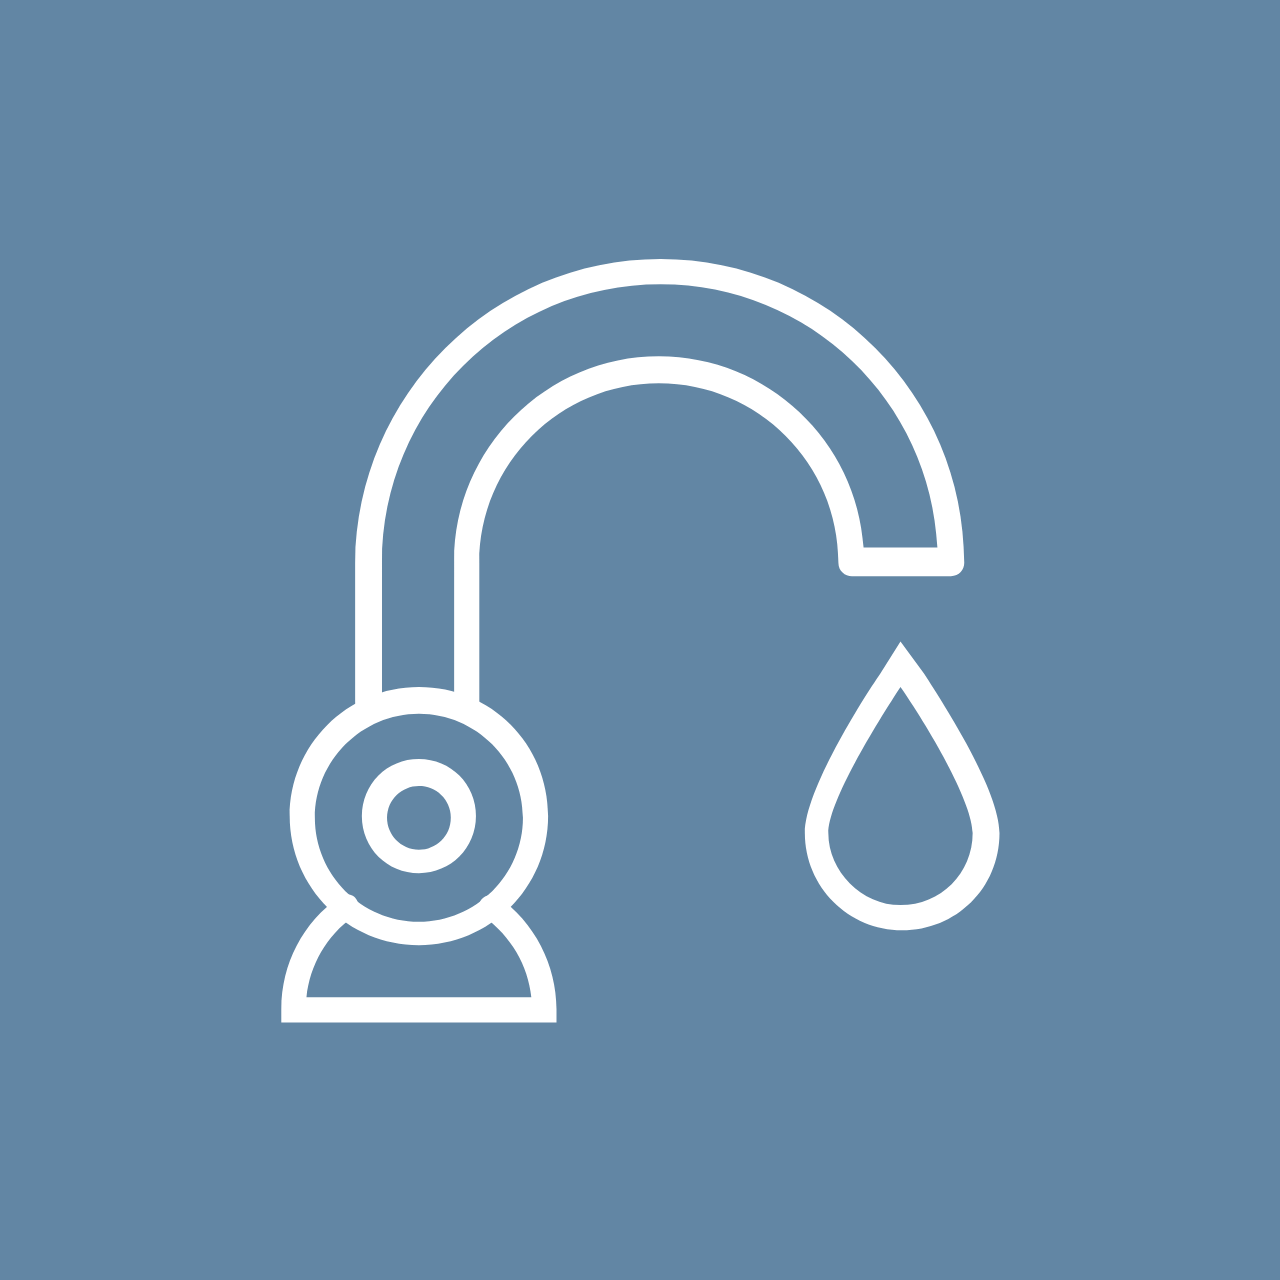 tap-water-icon_arctic-blue_1280x1280.png